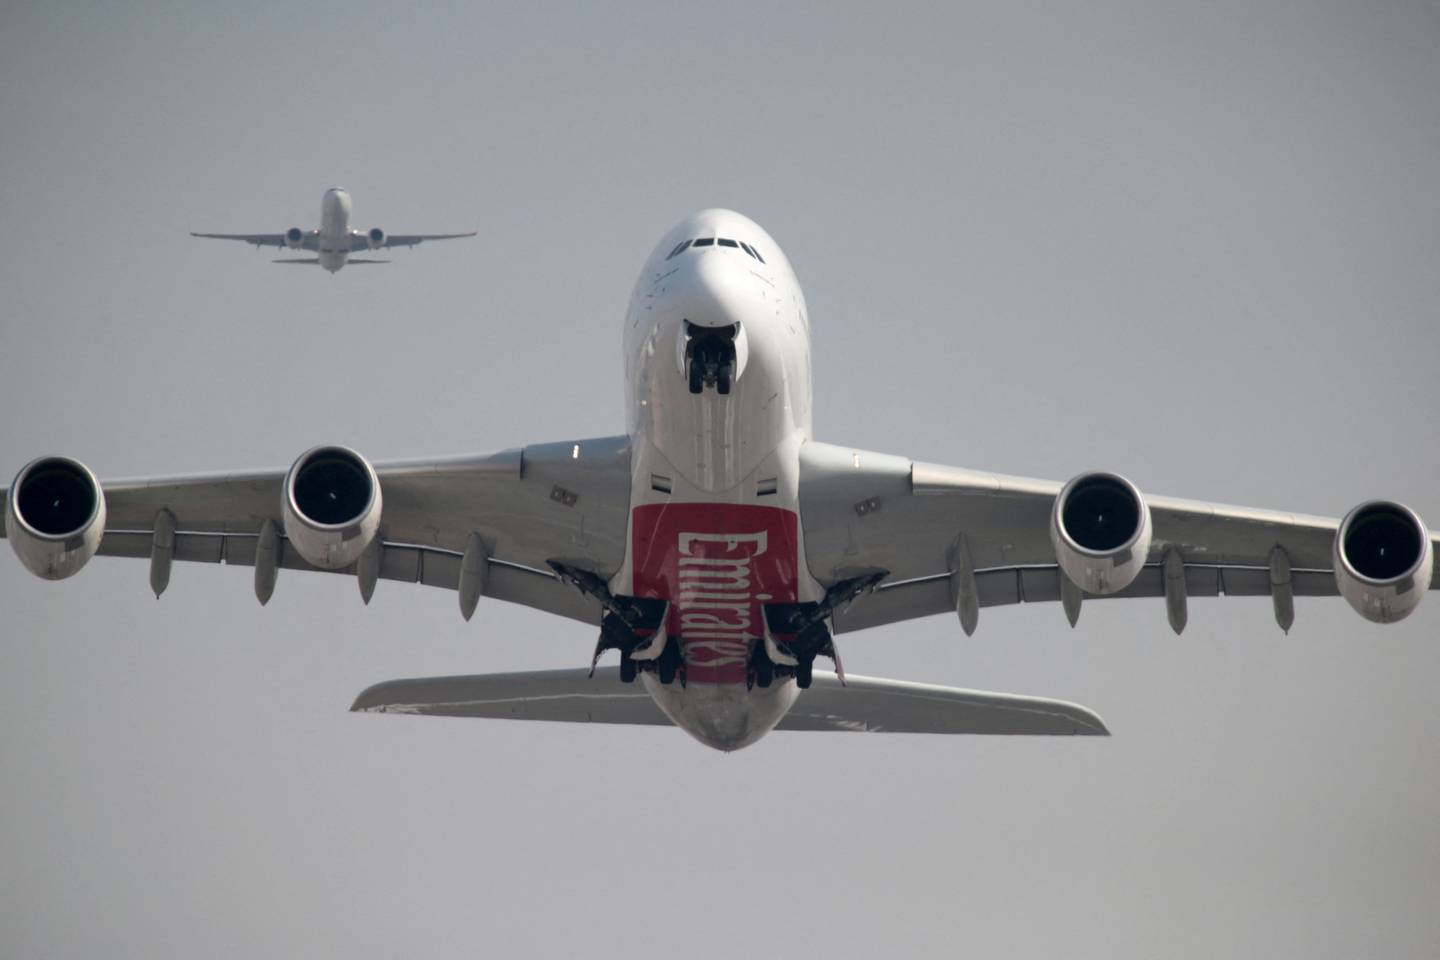 An Emirates airline Airbus A380-800 plane takes off from Dubai International Airport. Reuters